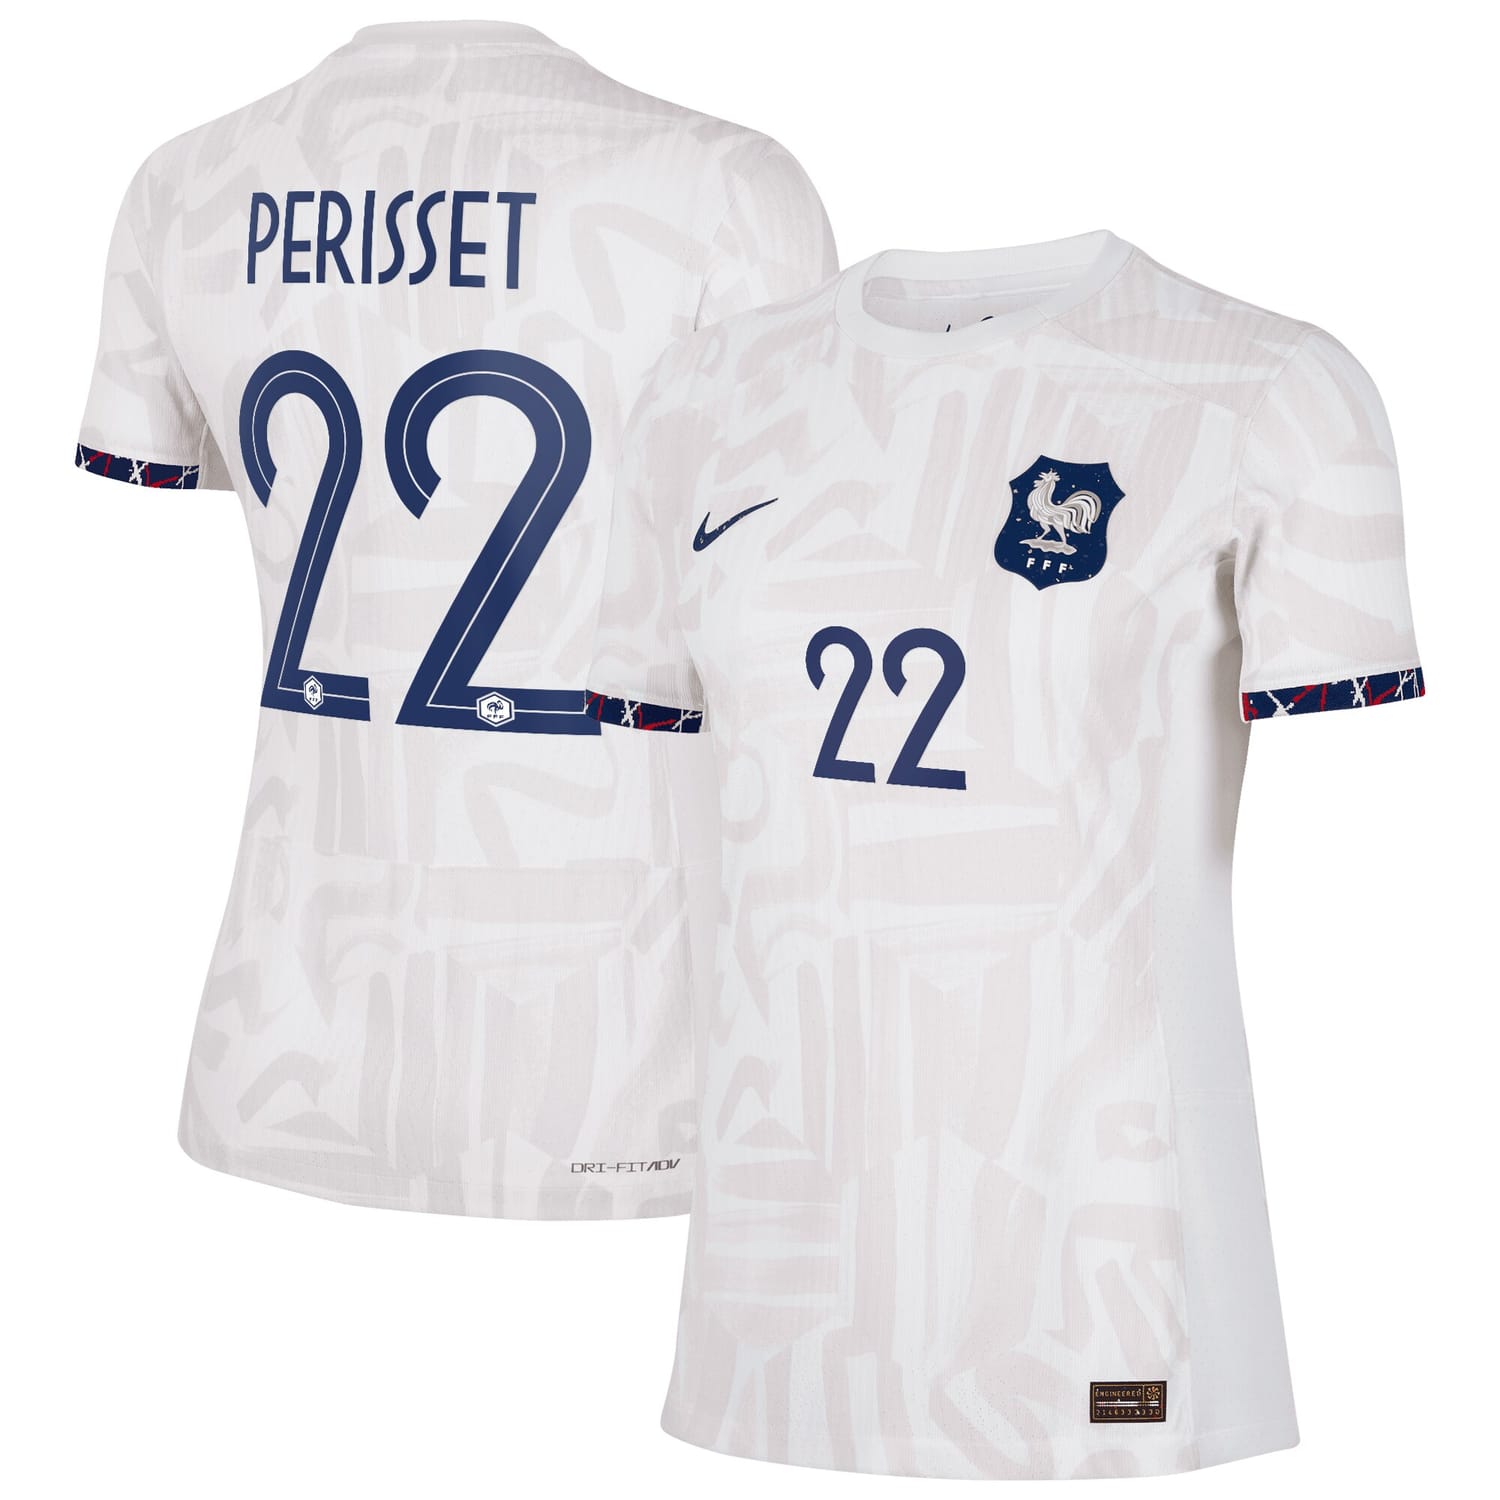 France National Team Away Authentic Jersey Shirt 2023-24 player Eve Perisset 22 printing for Women